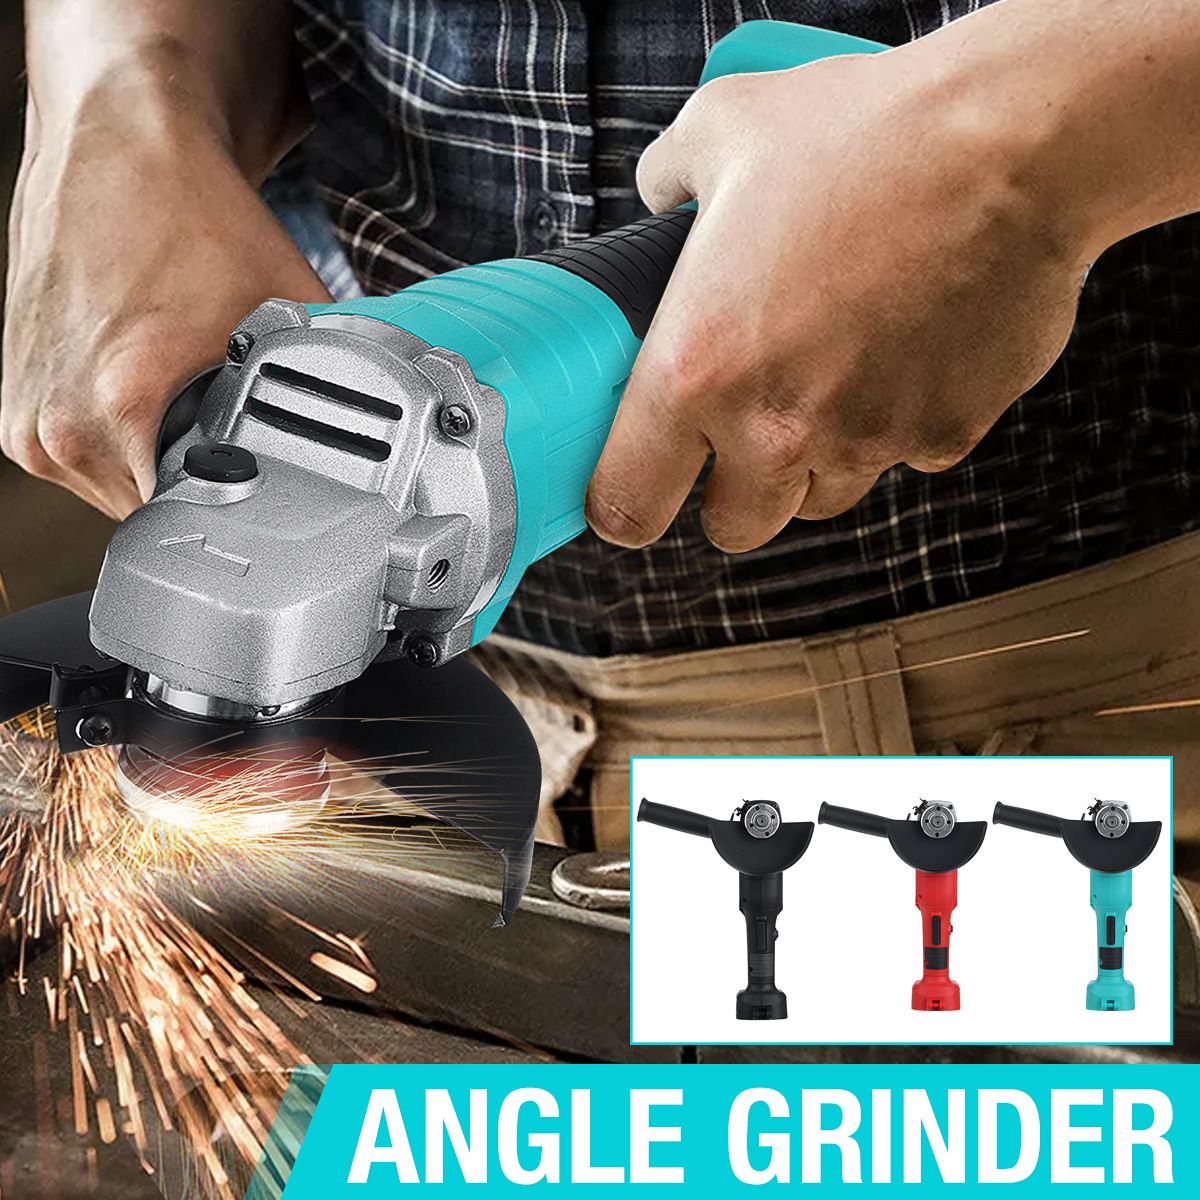 125mm-Cordless-Electric-Angle-Grinder-Cutting-Machine-Polisher-DIY-Power-Tool-1743685